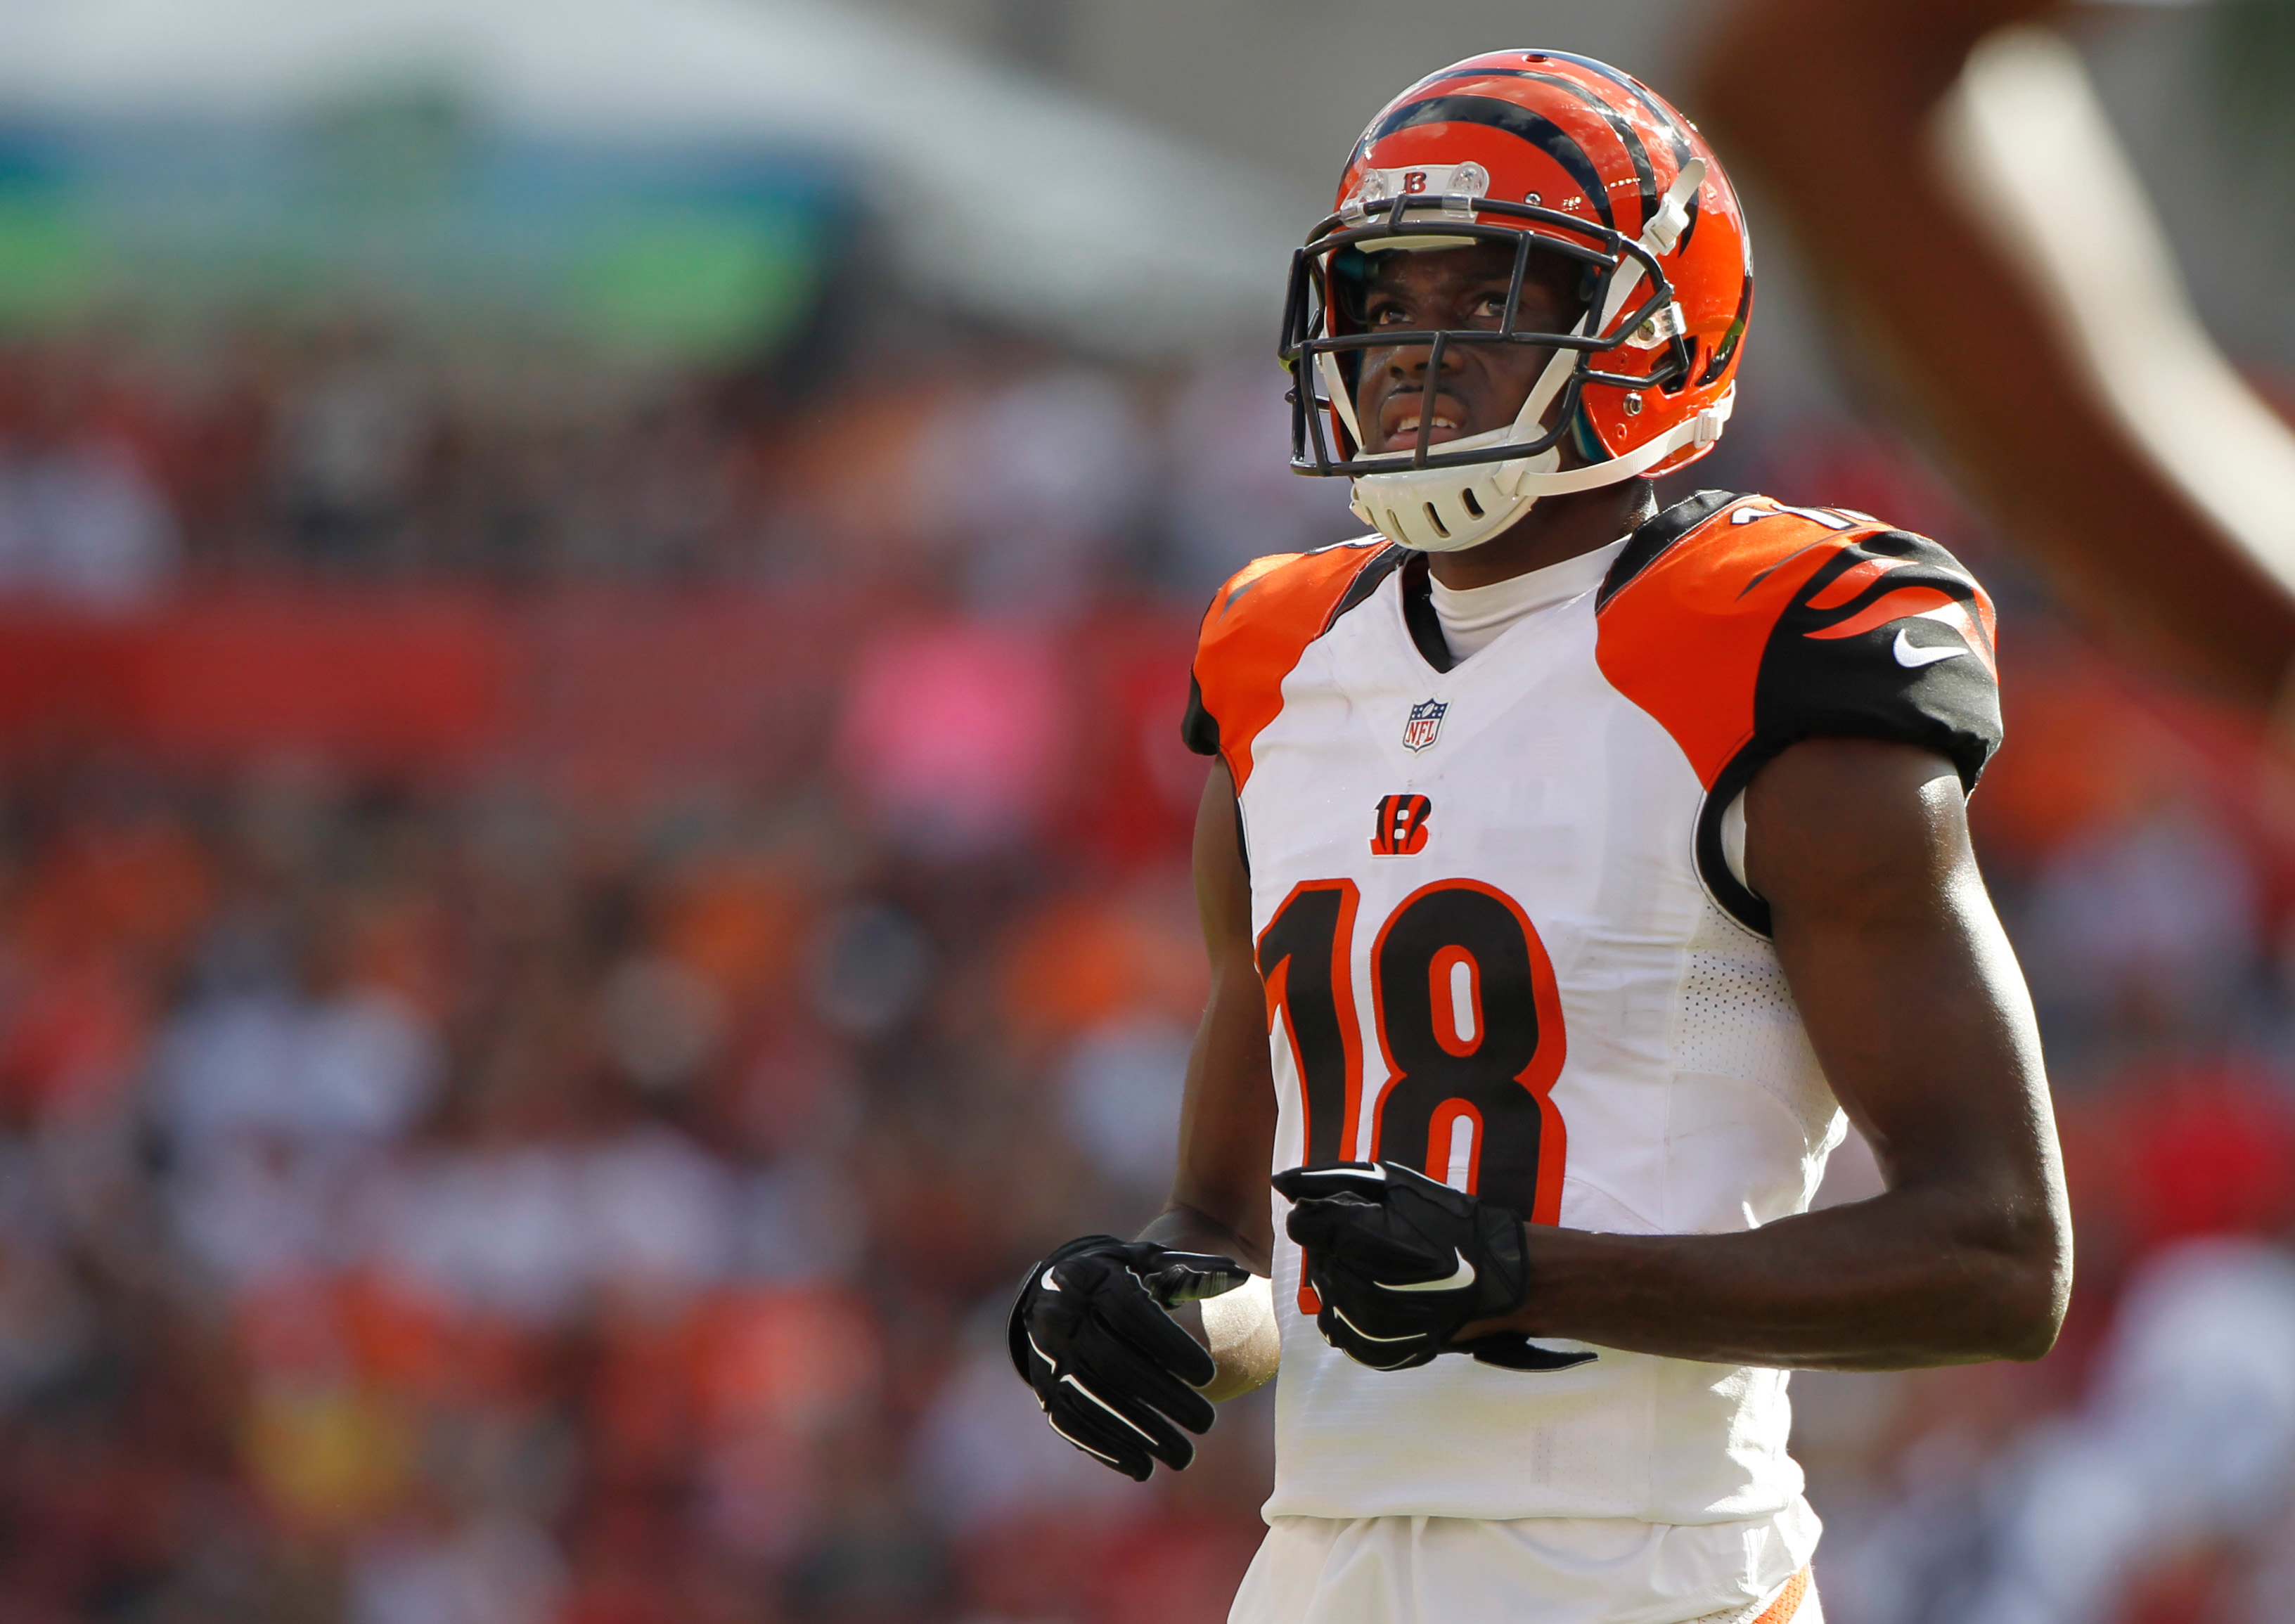 A.J. Green To Play 2015 Without New Deal